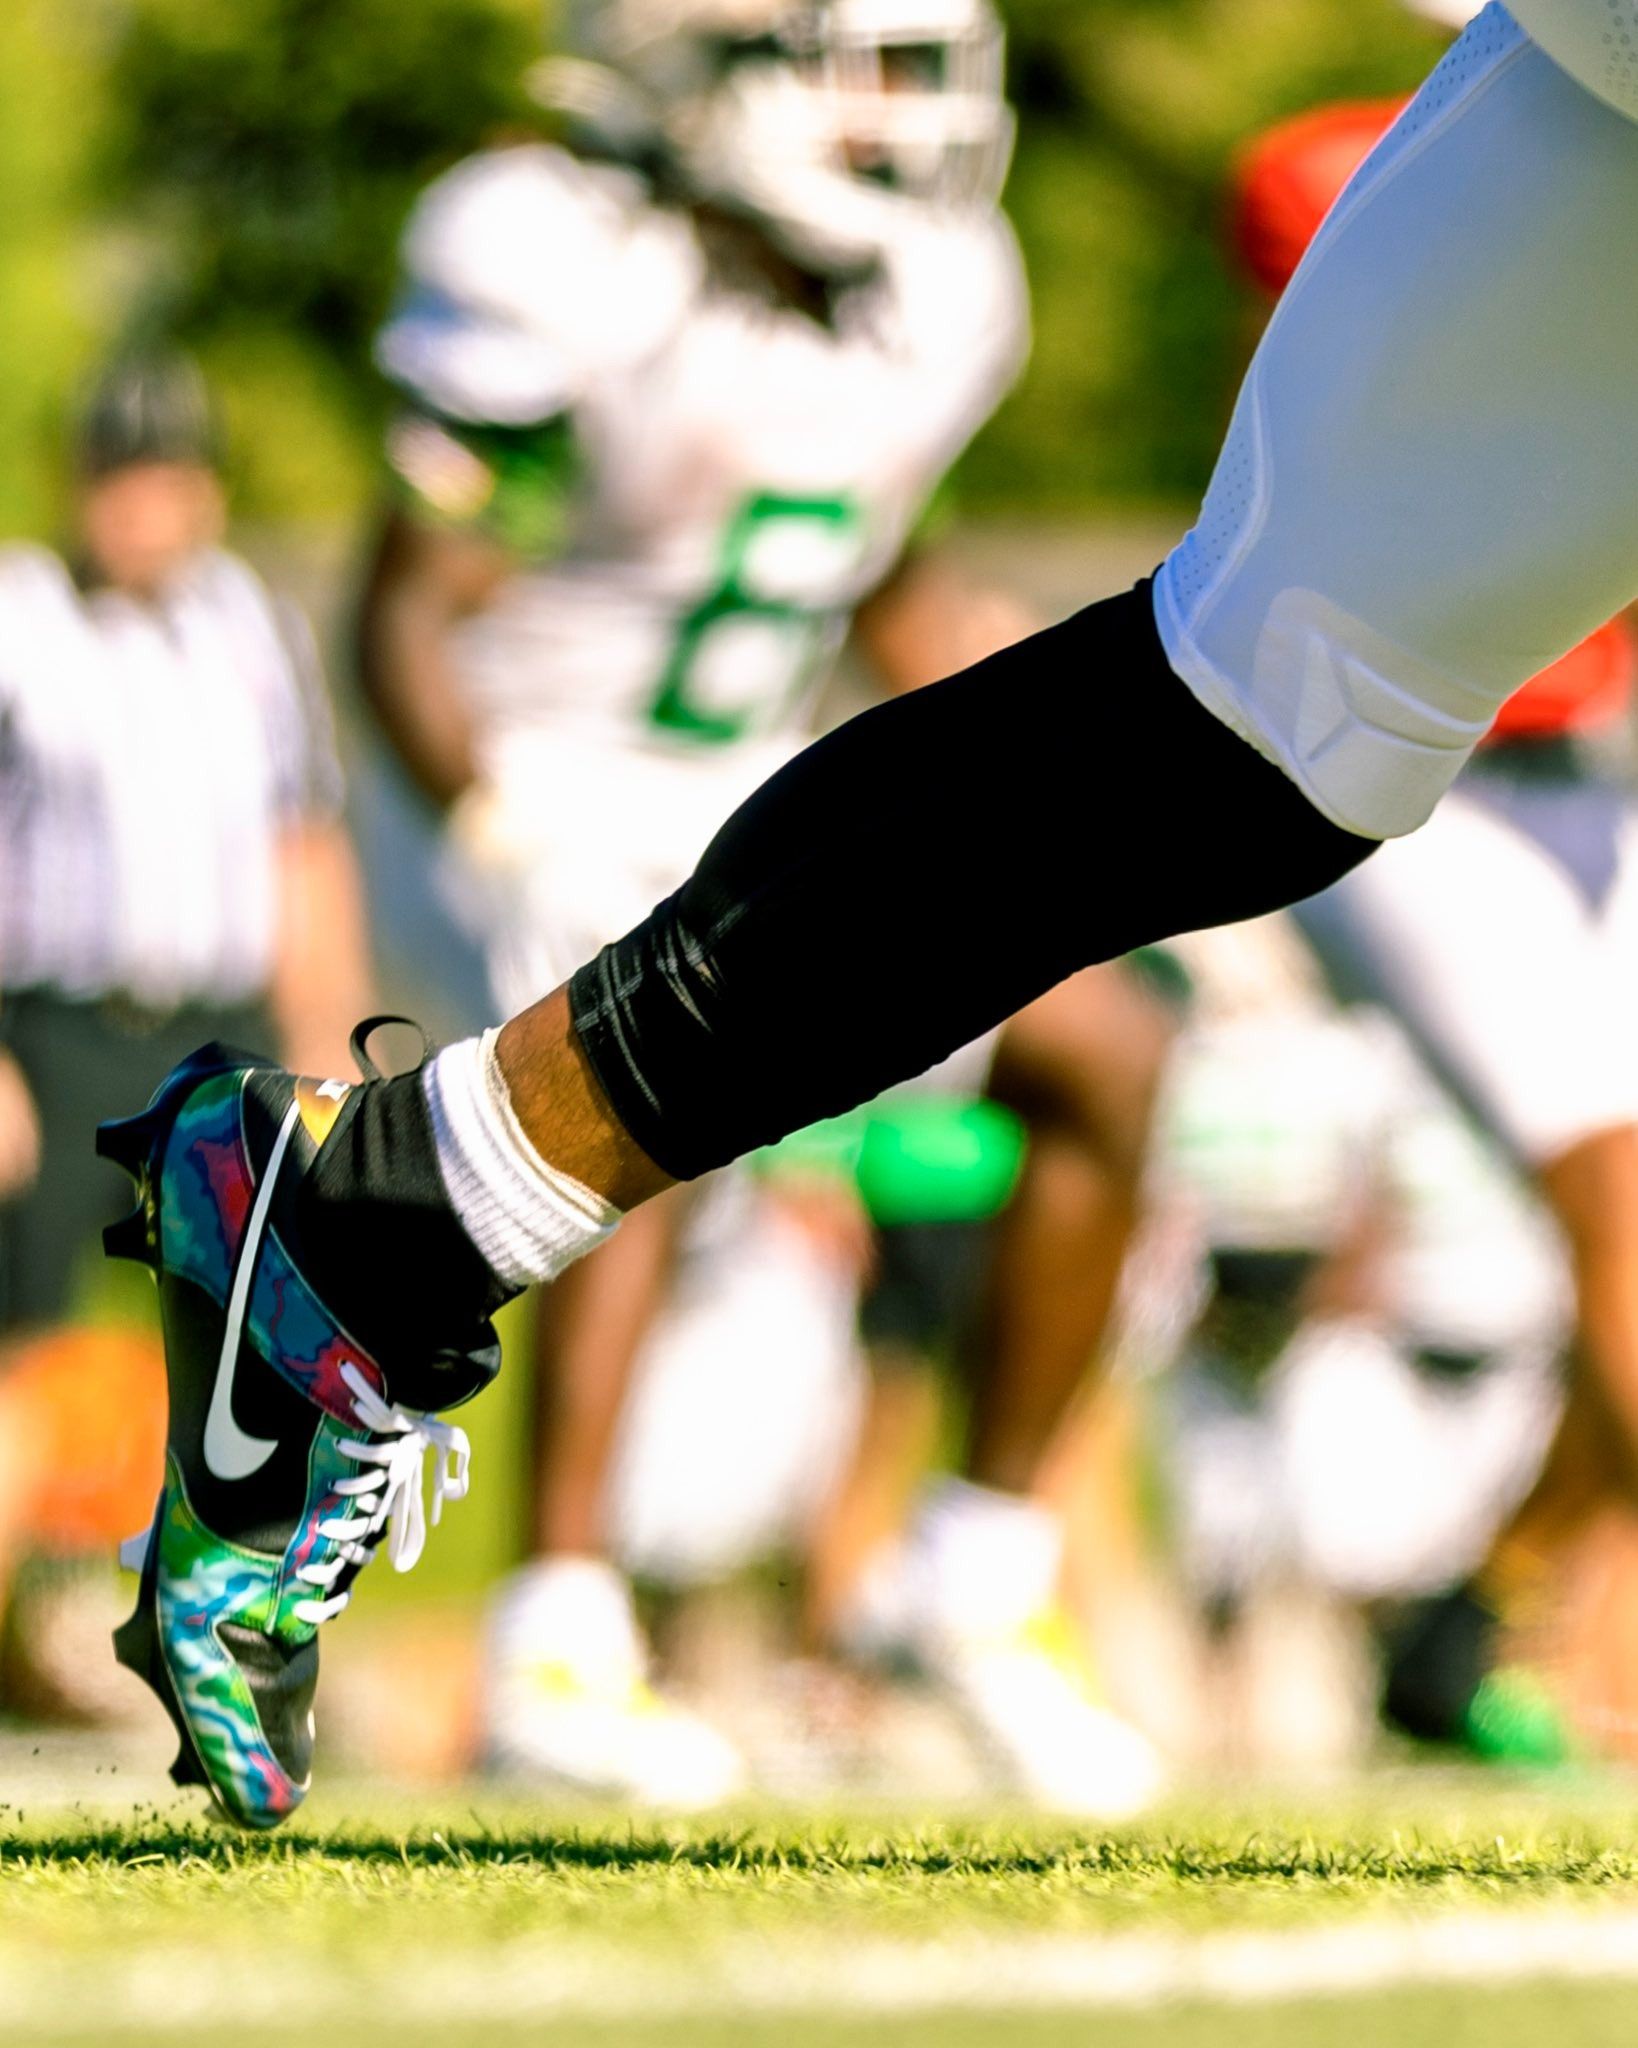 Oregon's Color-Changing Cleats Are Turning Heads